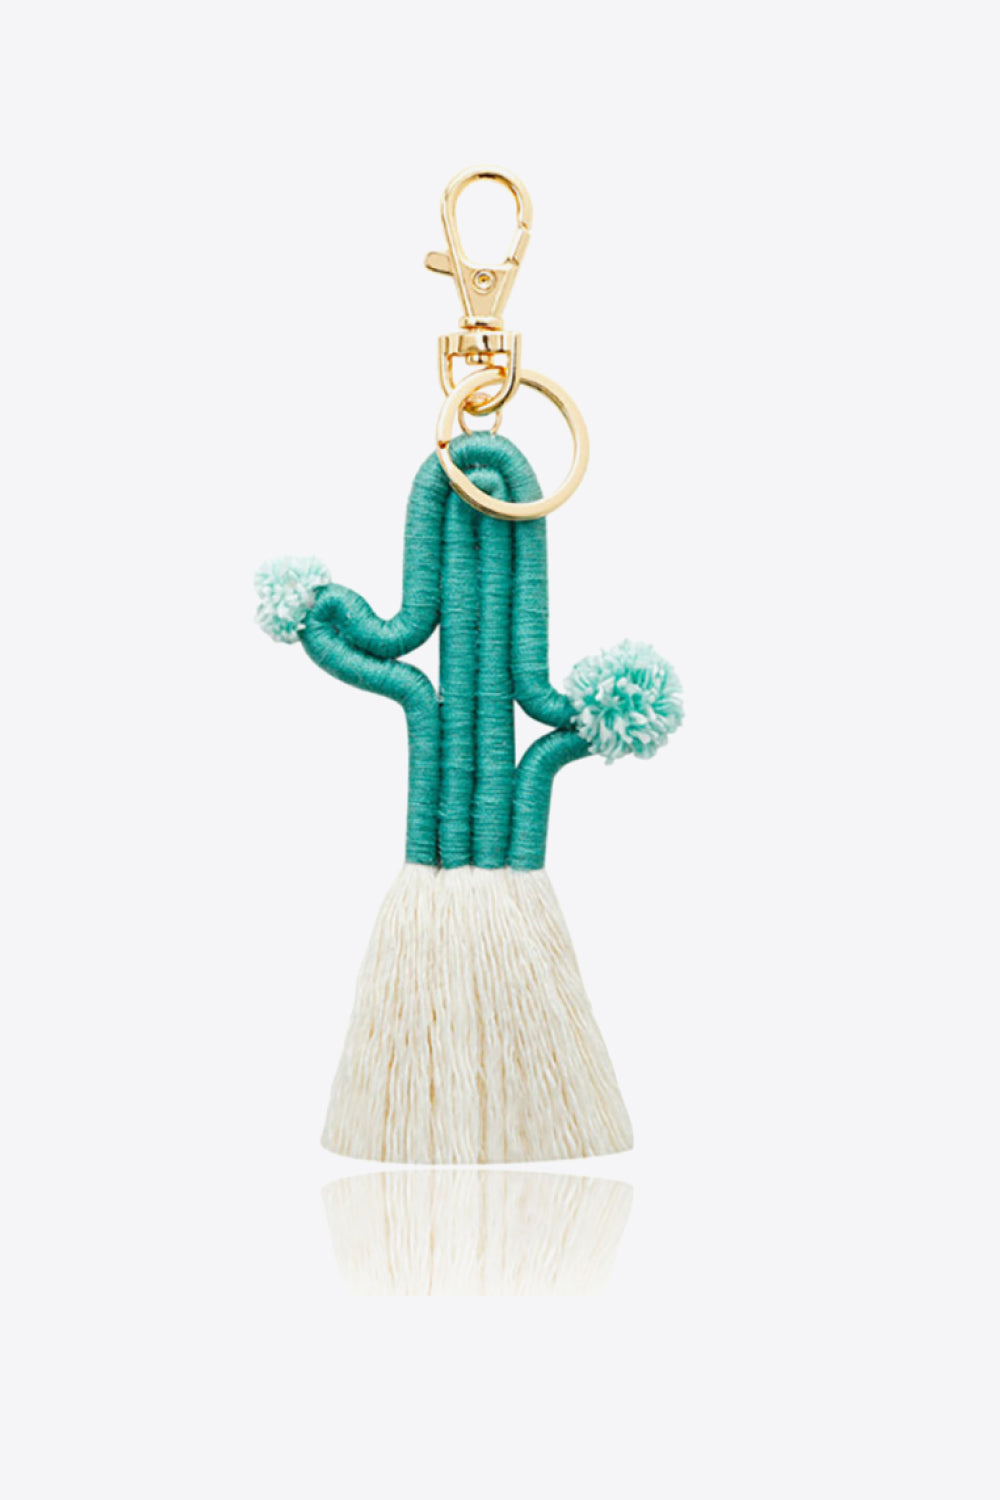 Trendsi Cupid Beauty Supplies Turquoise / One Size Keychains Cactus Keychain with Fringe